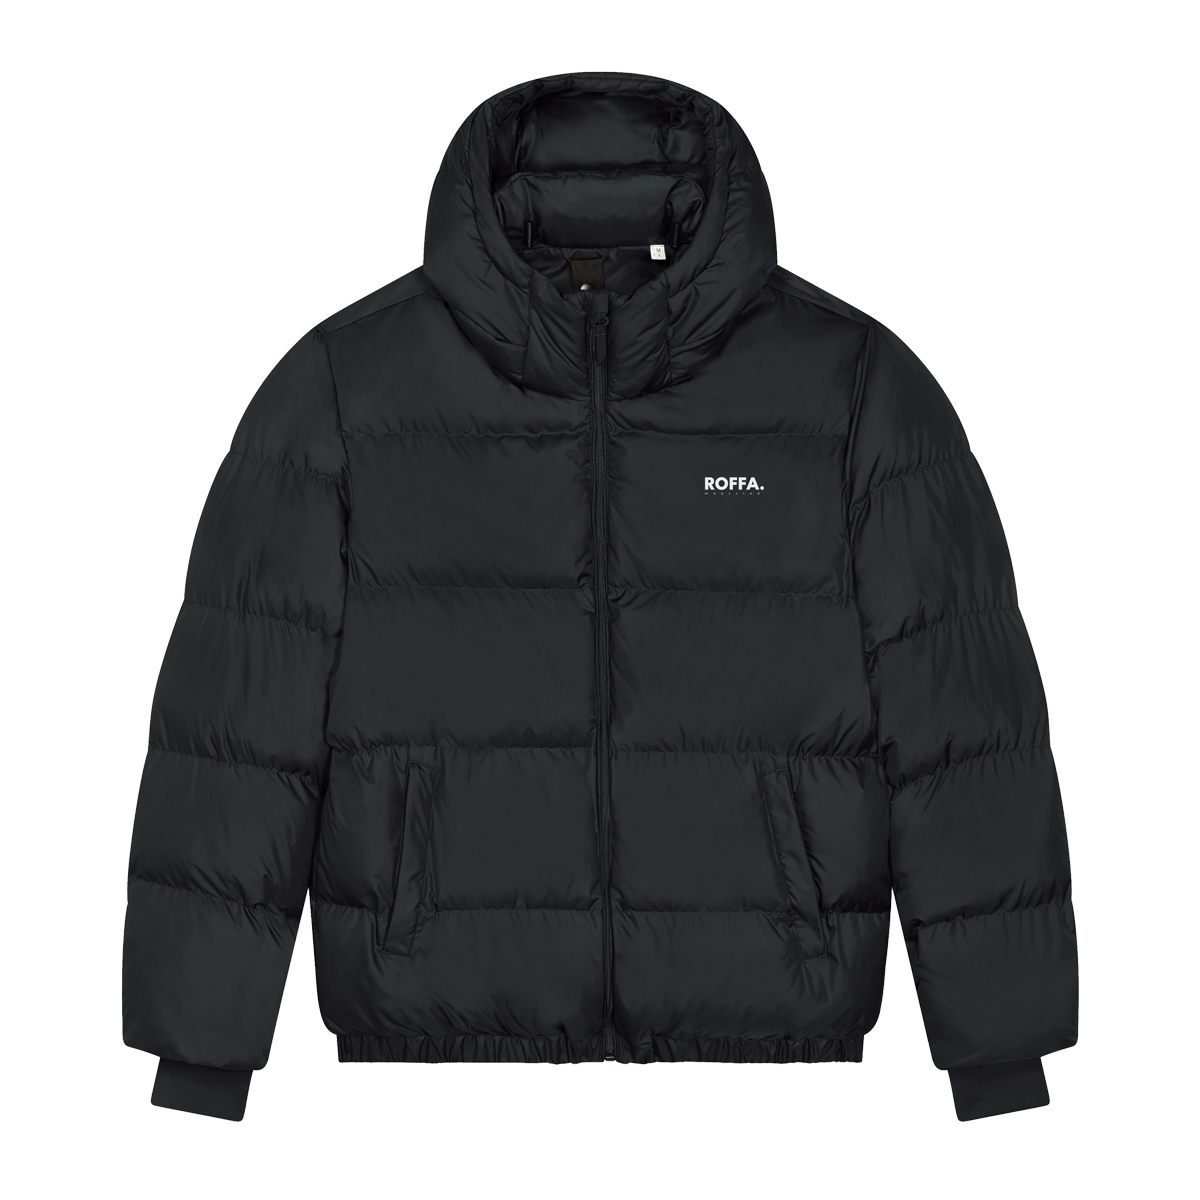 ROFFA. puffer jas - gerecycled polyester - logo links